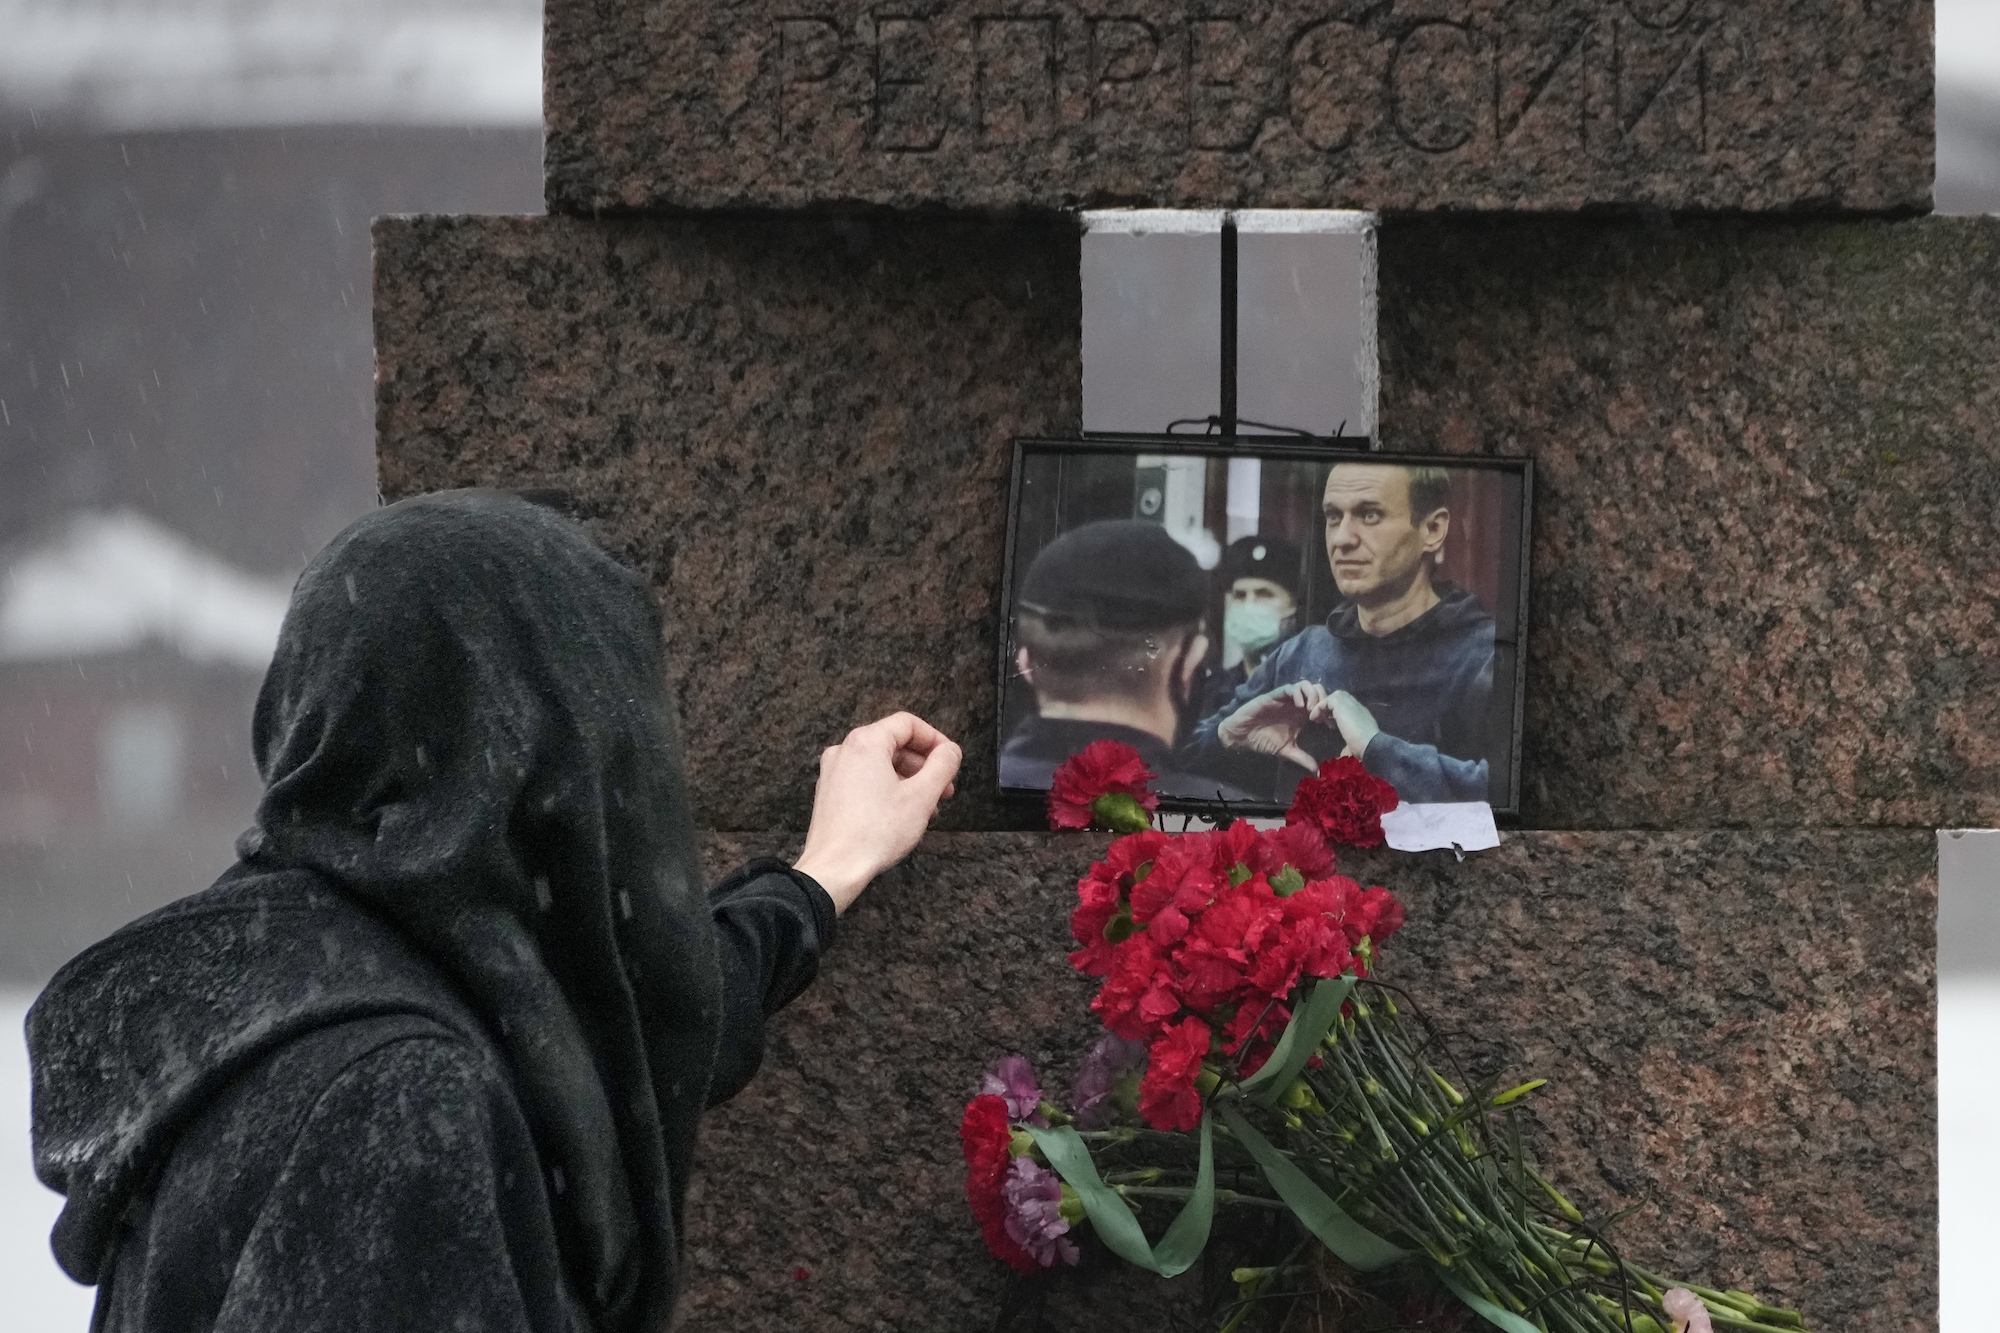 A person touches a photo of Alexei Navalny after laying flowers at the Memorial to Victims of Political Repression in St. Petersburg, Russia.